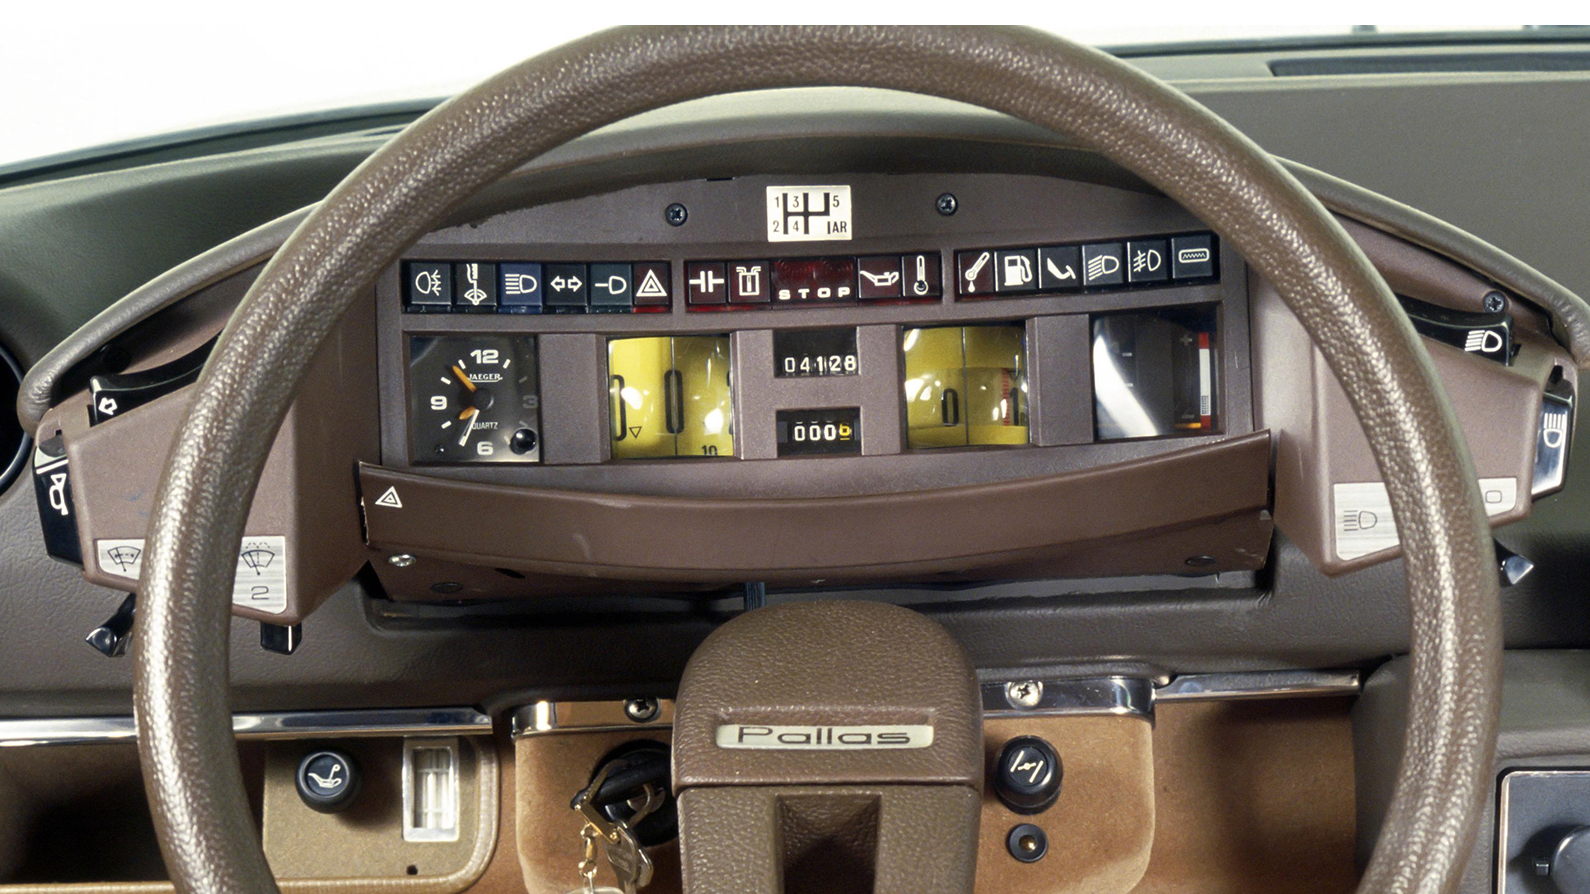 This Has To Be The Most Sci-Fi Non-Digital Dashboard Ever